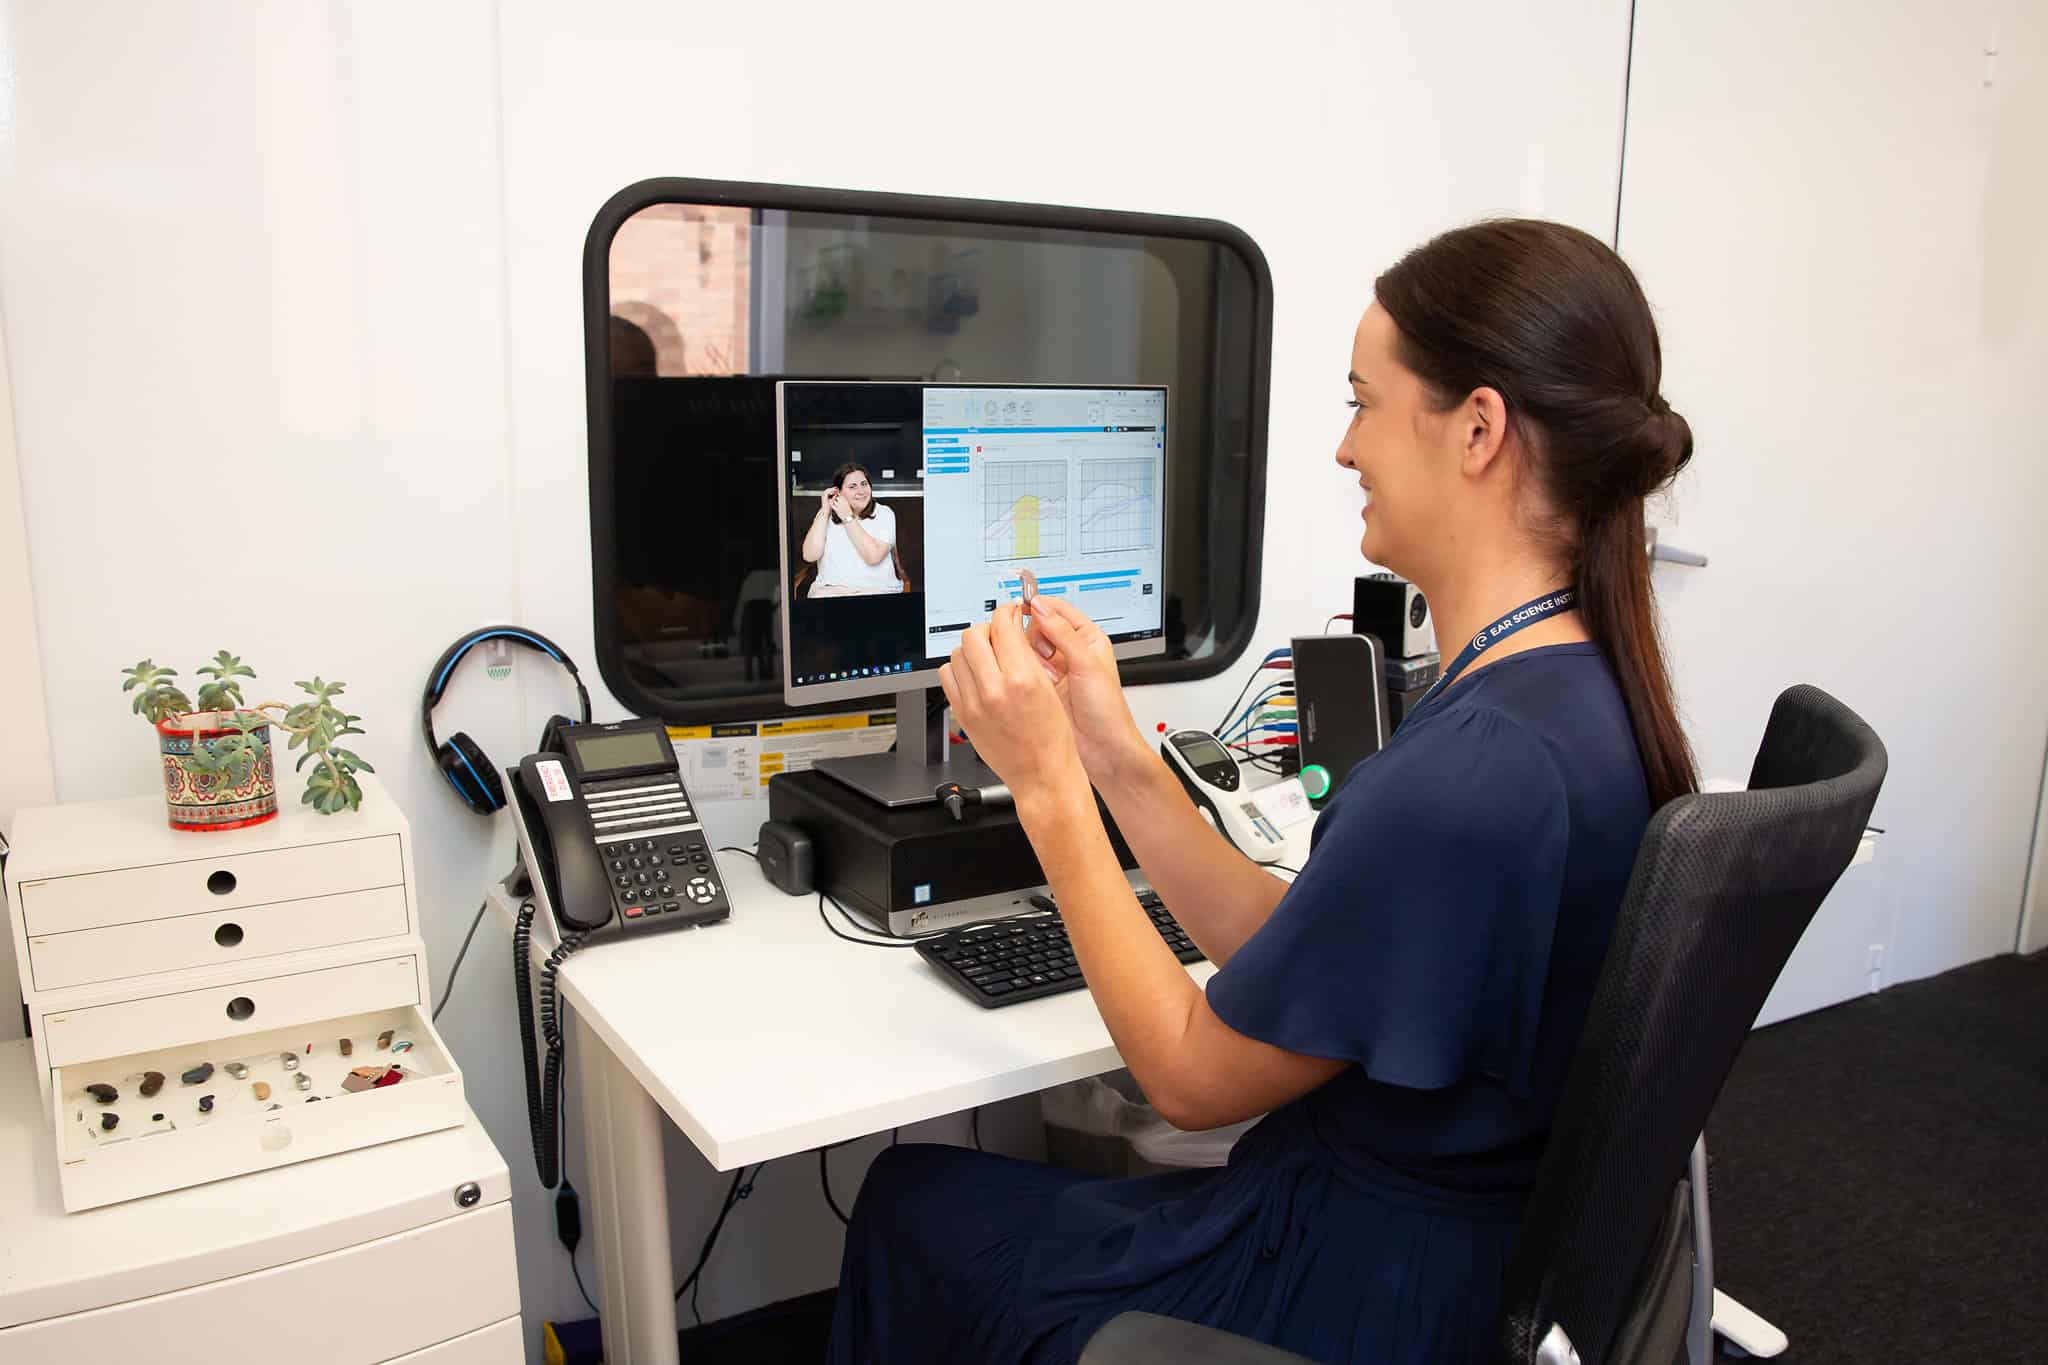 Australian research project trials tele-audiology services for cochlear recipients